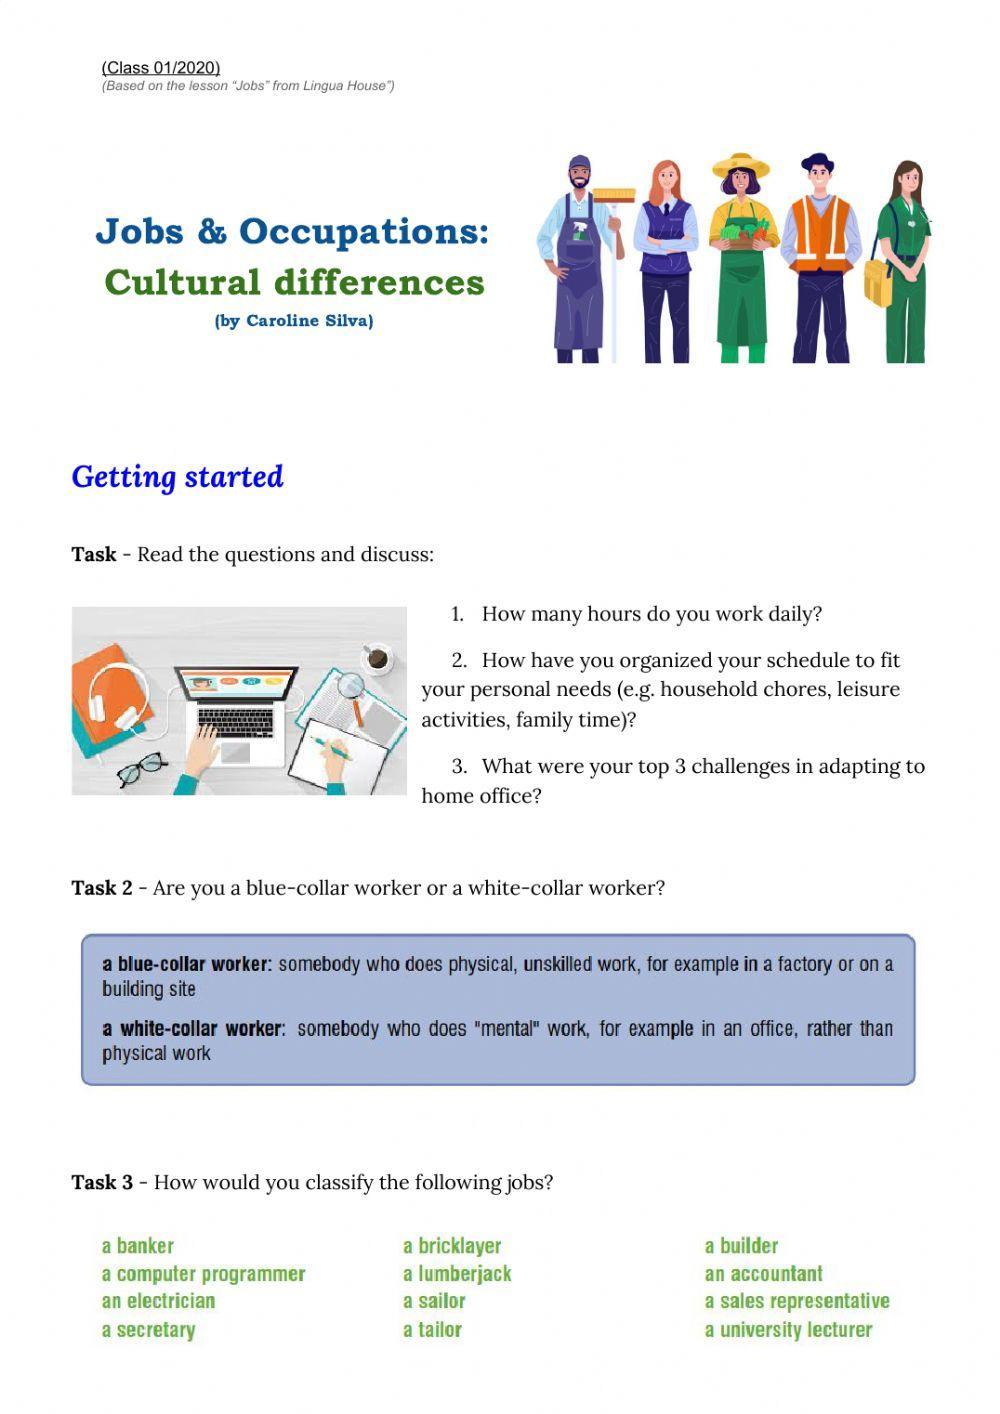 Job & Occupations: Cultural differences